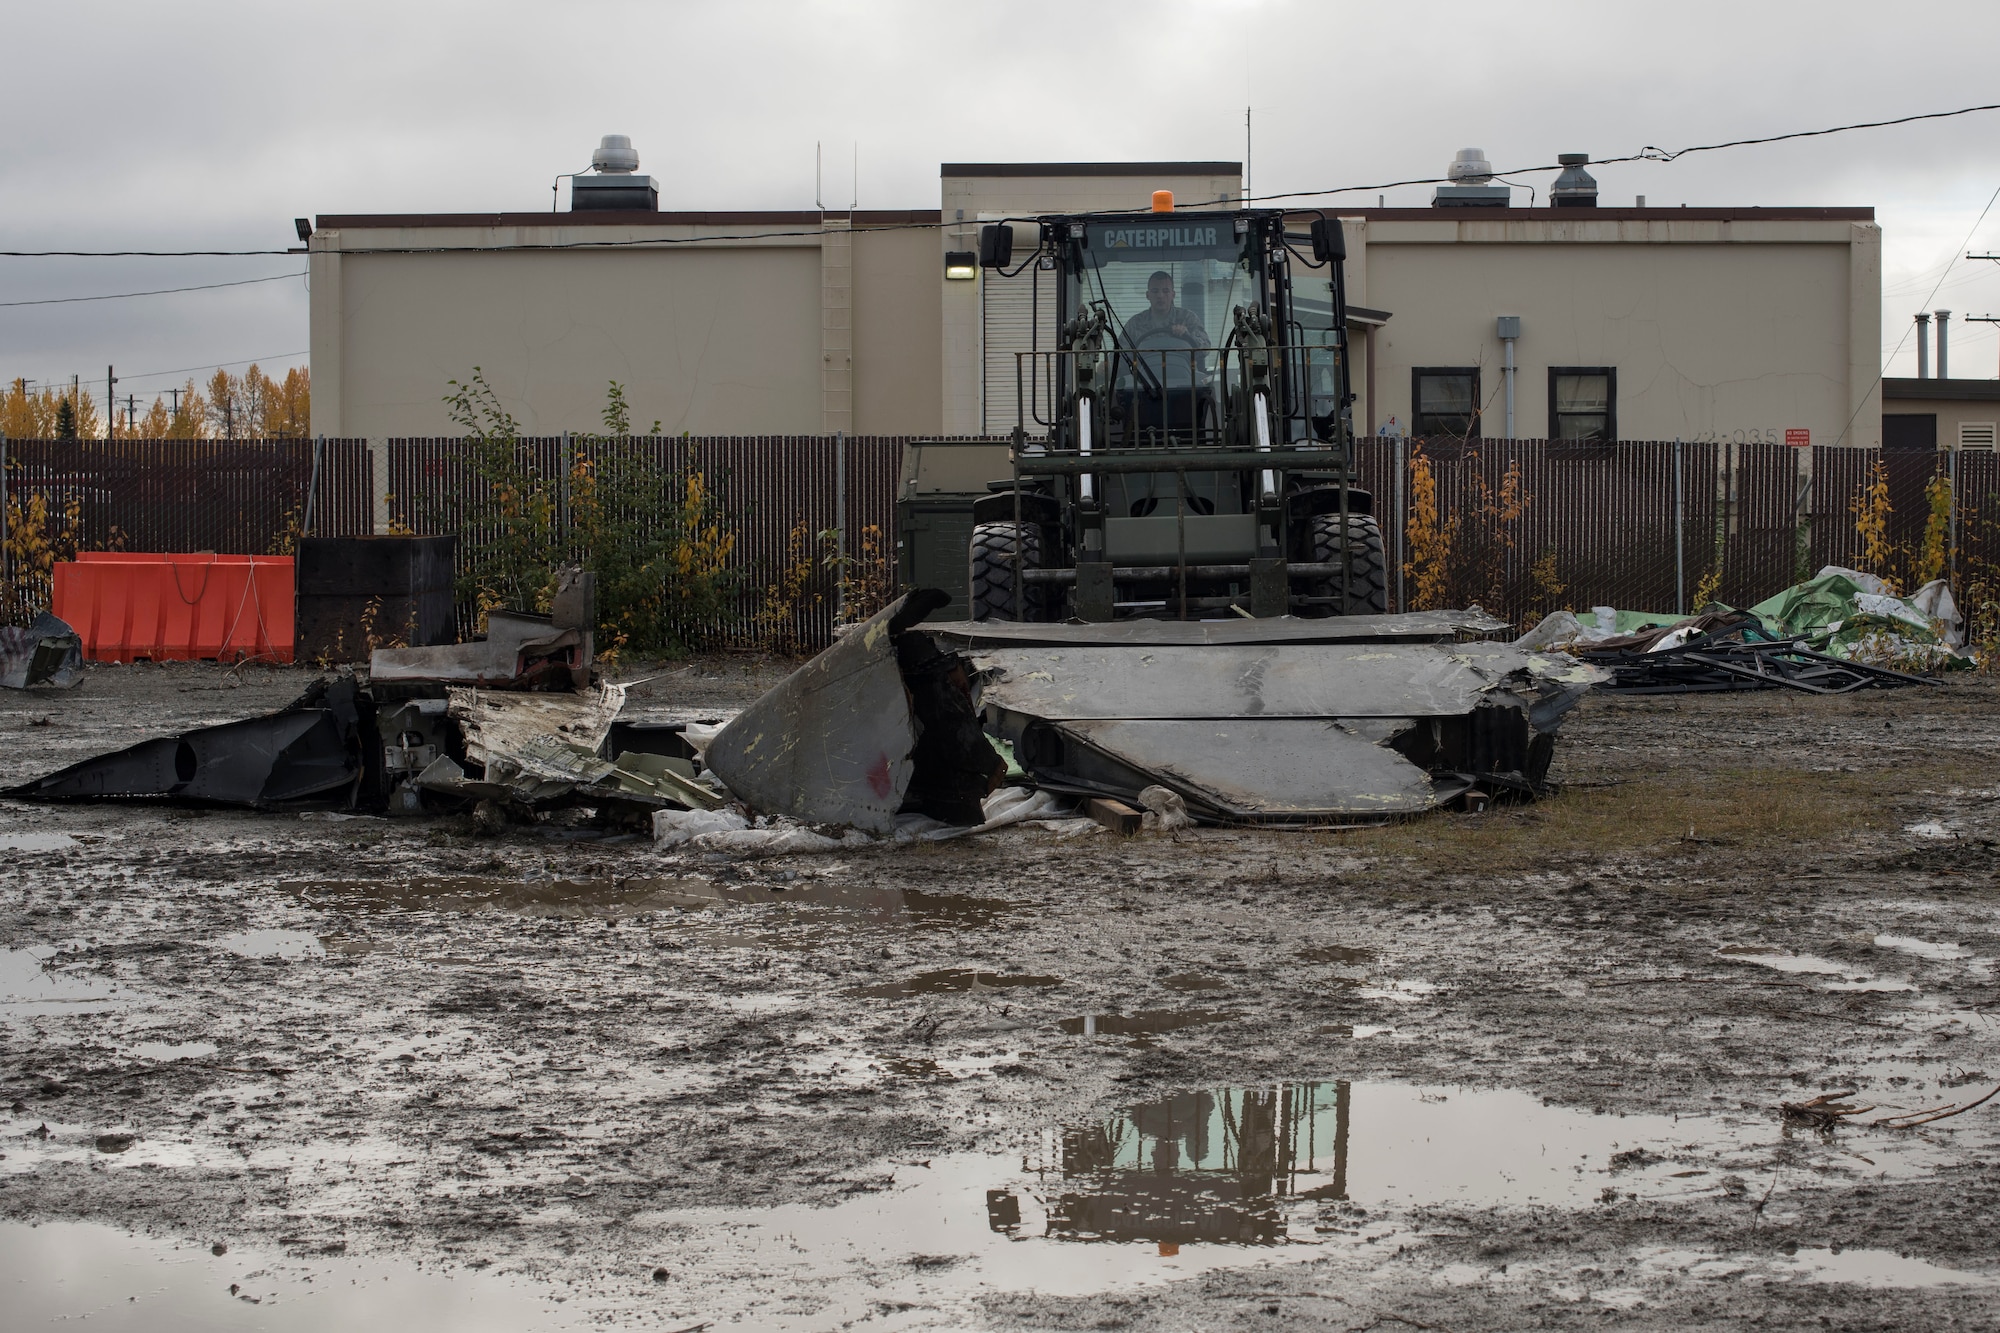 U.S. Air Force Senior Airman Christopher Hershberger, a 773d Logistics Readiness Squadron vehicle operator, picks up part of a wing using a 10k all-terrain forklift to remove wreckage debris at Joint Base Elmendorf-Richardson, Alaska, Sept. 28, 2018. Hershberger was part of a large wreckage disposal team whose mission was to remove debris from the fatal crash of the Sitka 43 C-17 Globemaster III that had been stored at JBER since 2010.